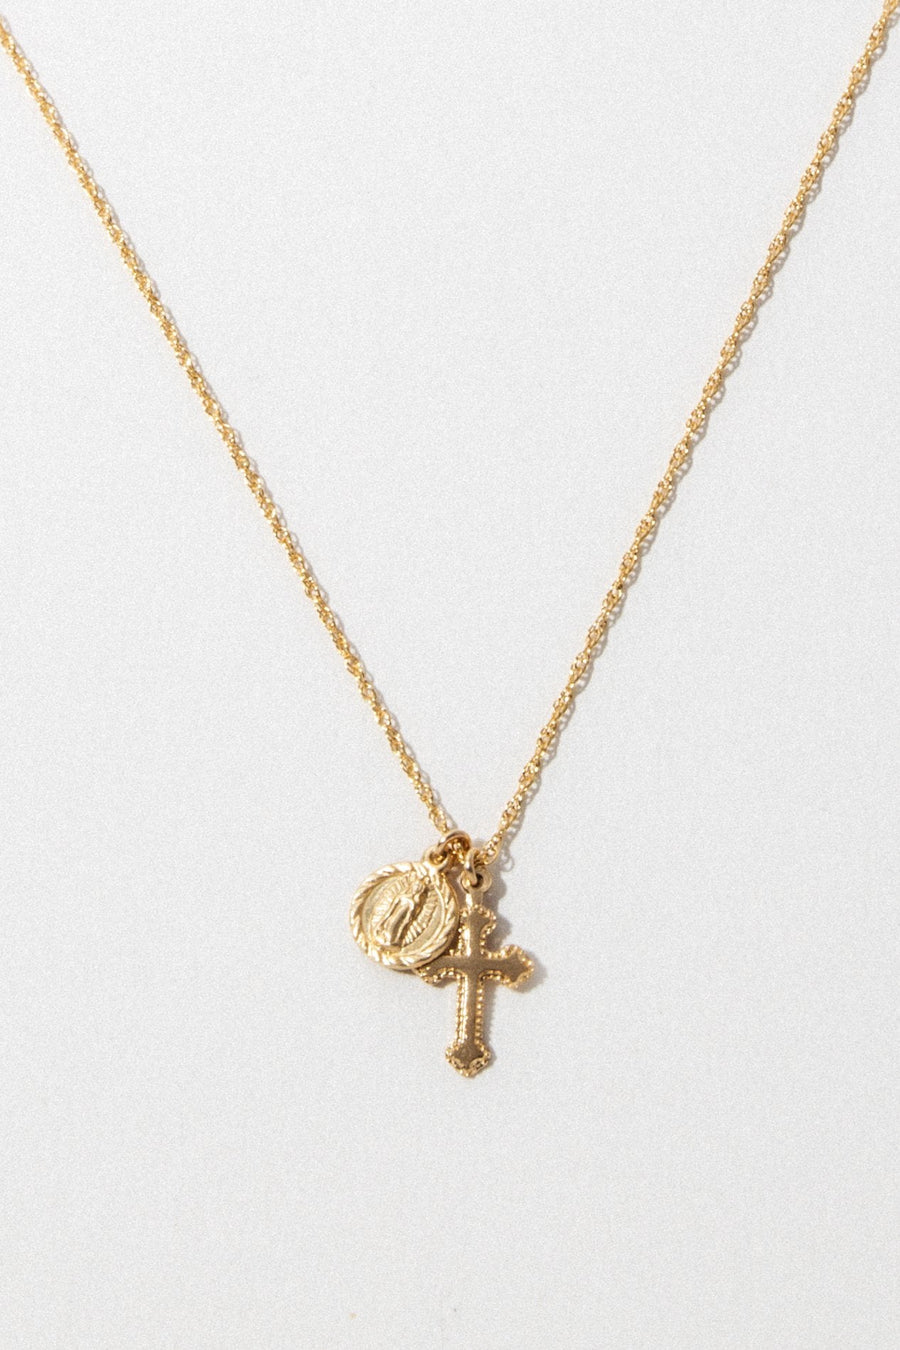 CGM Jewelry Gold / 16 Inches The Hail Mary Dainty Necklace